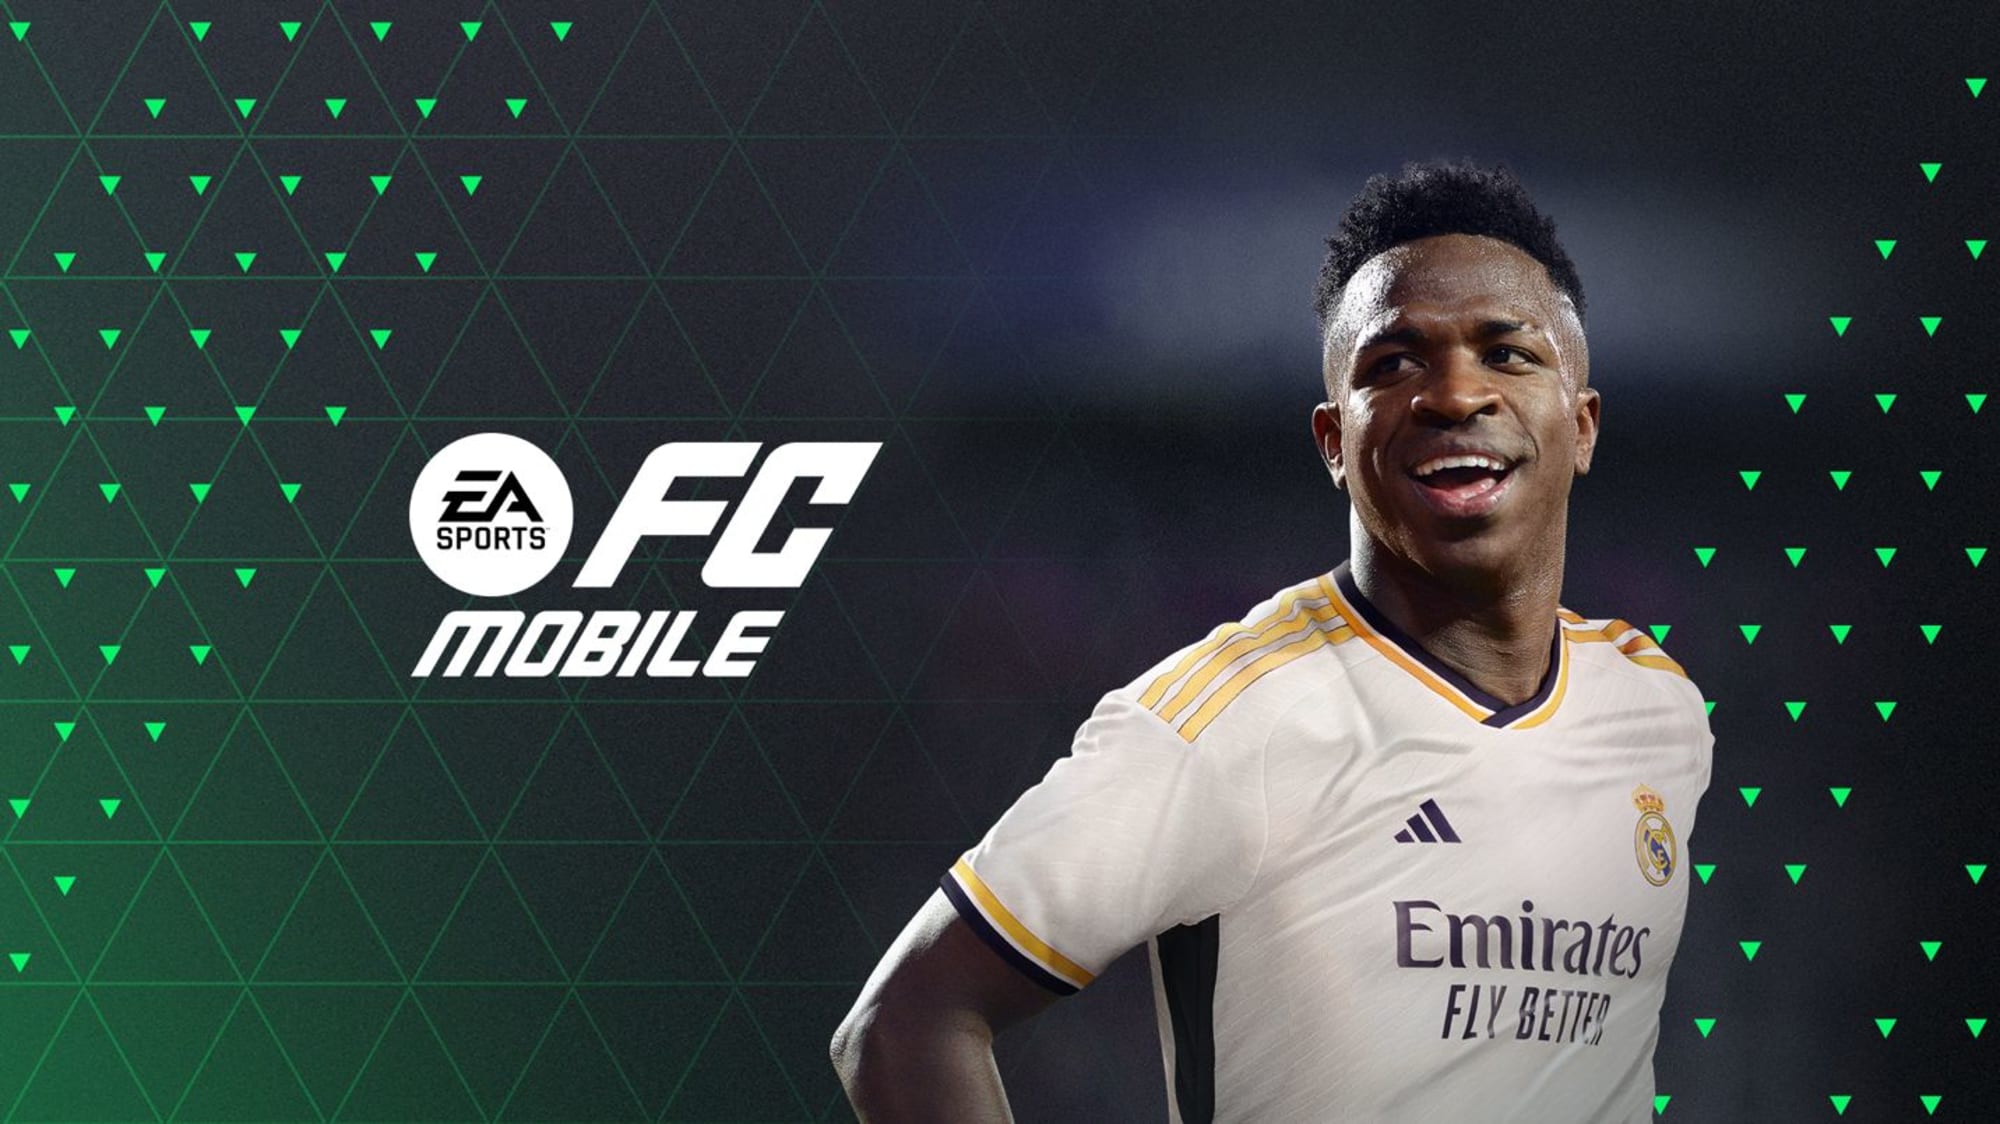 THE FIFA 19 WEB APP! RELEASE DATE AND NEW FEATURES! 